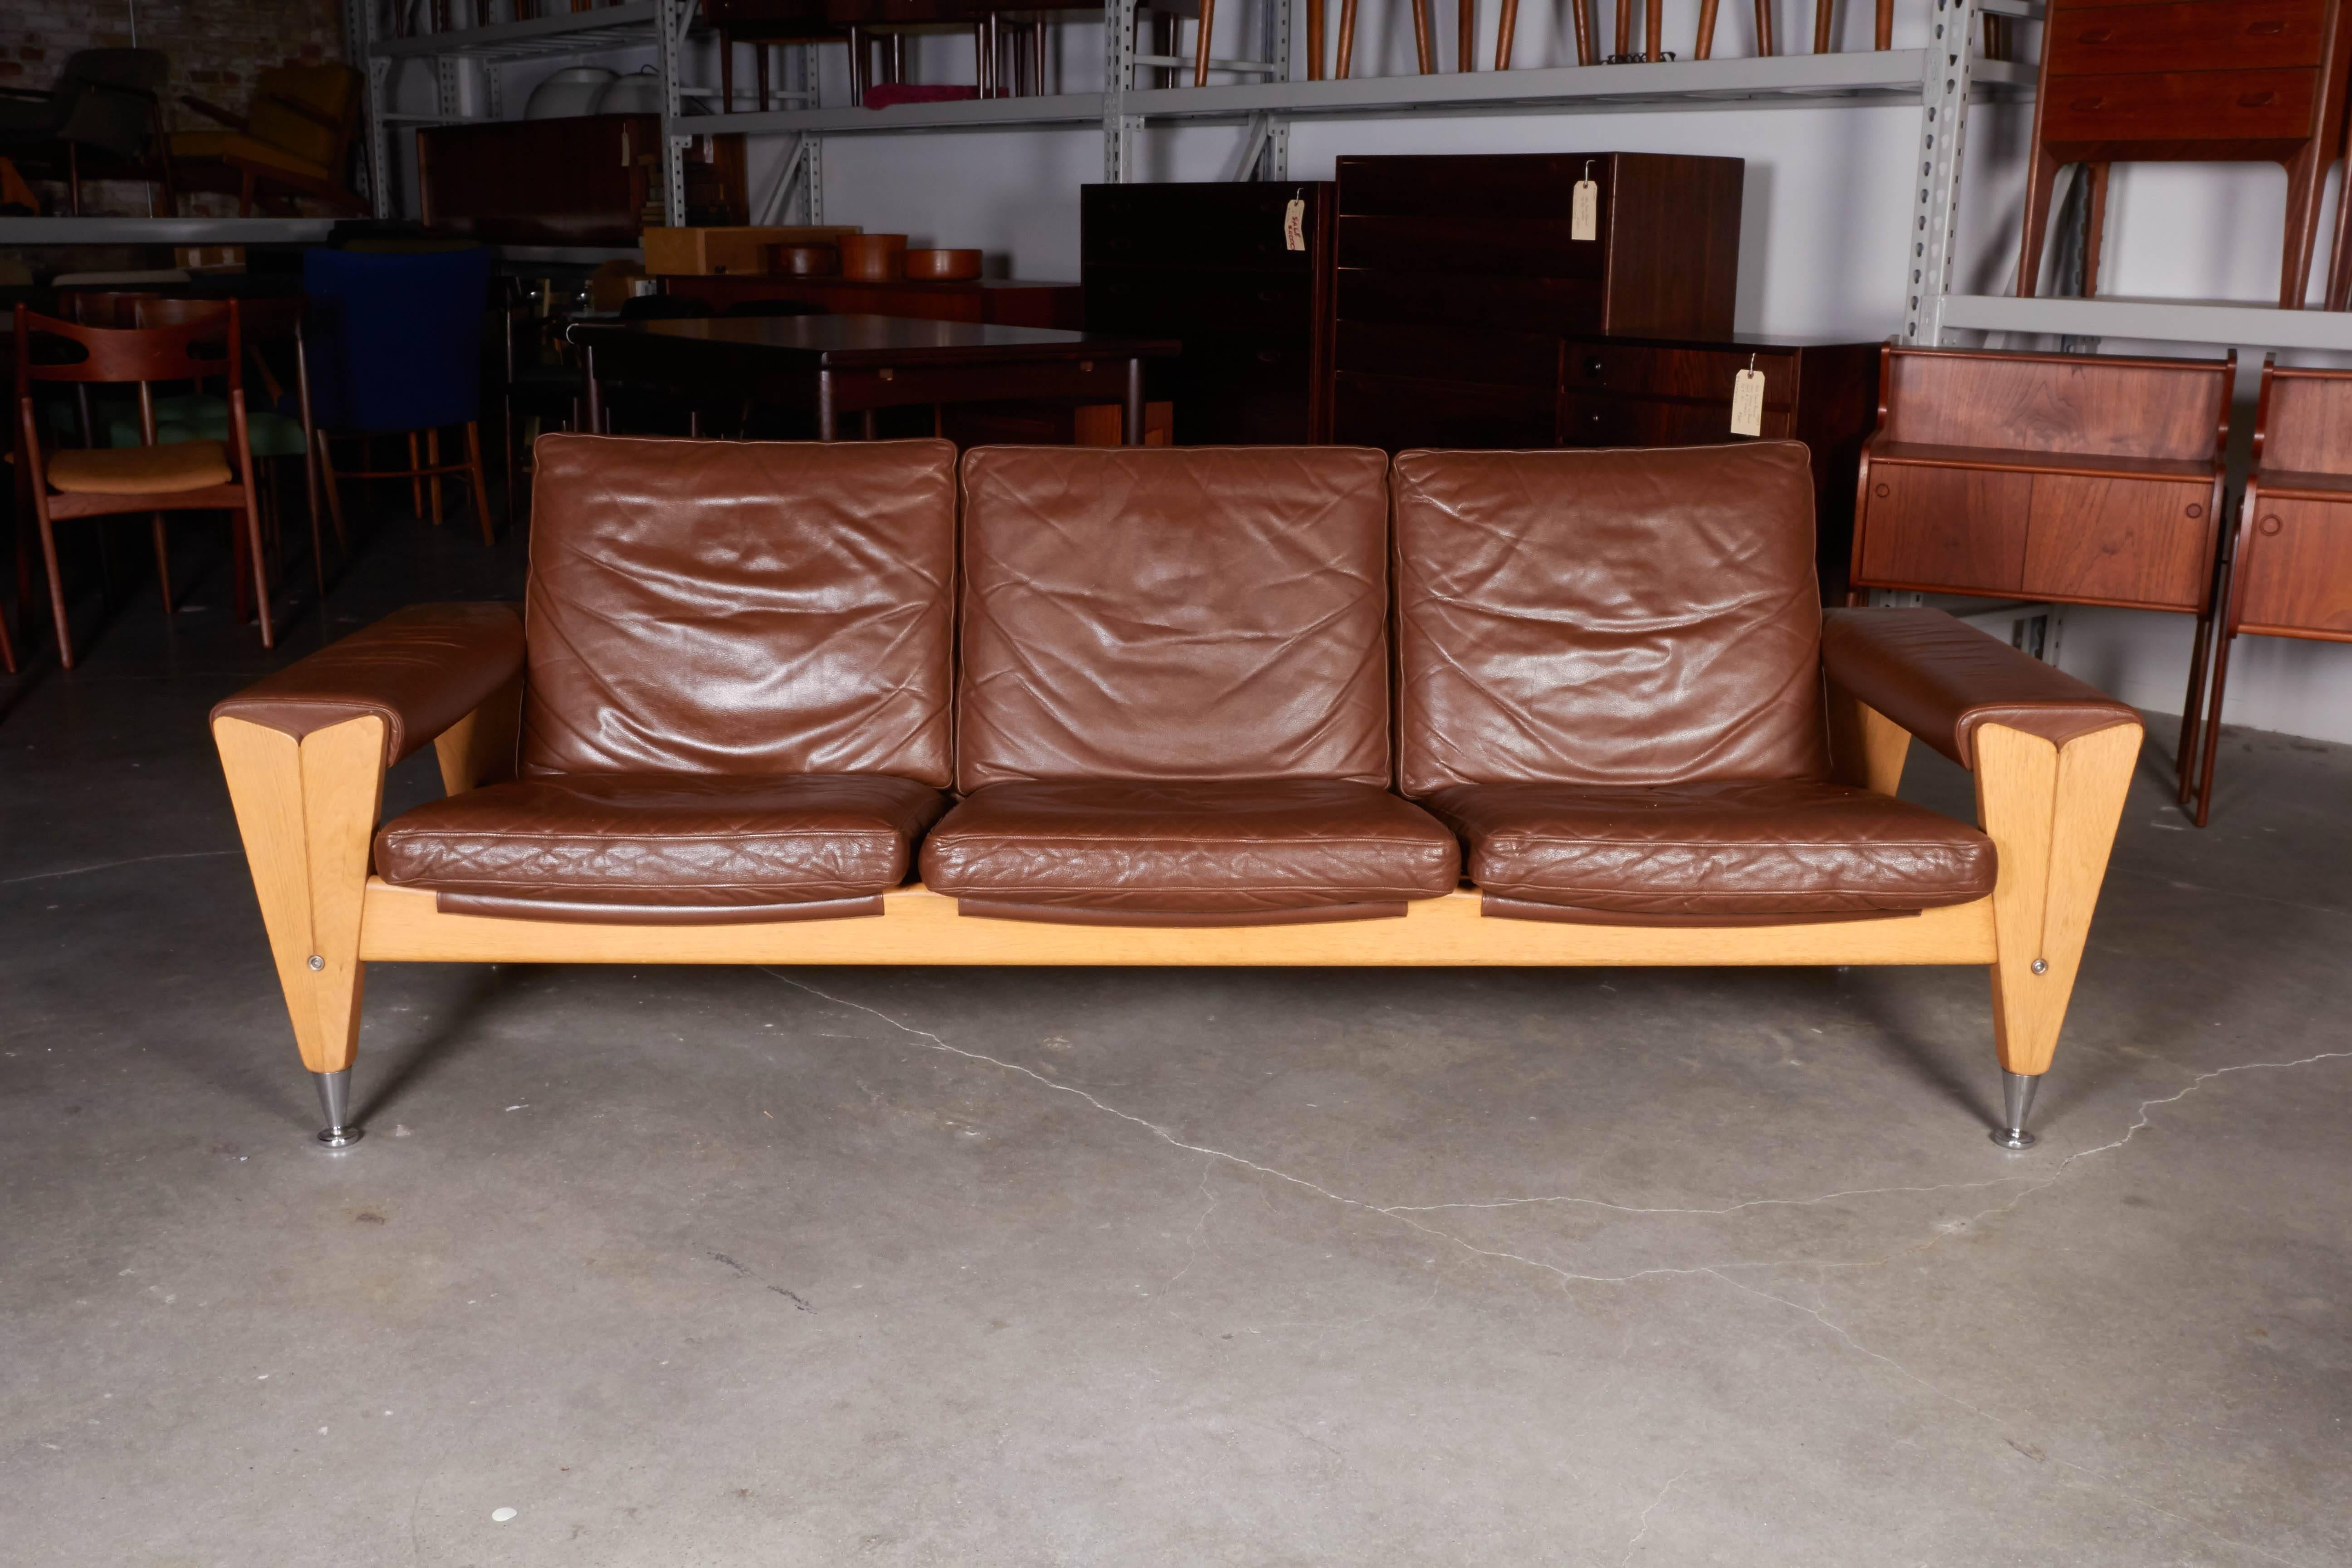 Vintage 1960s Hans Wegner Oak GE 500 Sofa

This is a rare Hans Wegner sofa; only 500 made. Excellent condition and very comfortable. The cushions are only slightly used and the leather is perfectly broken in. Ready for pick up, delivery or